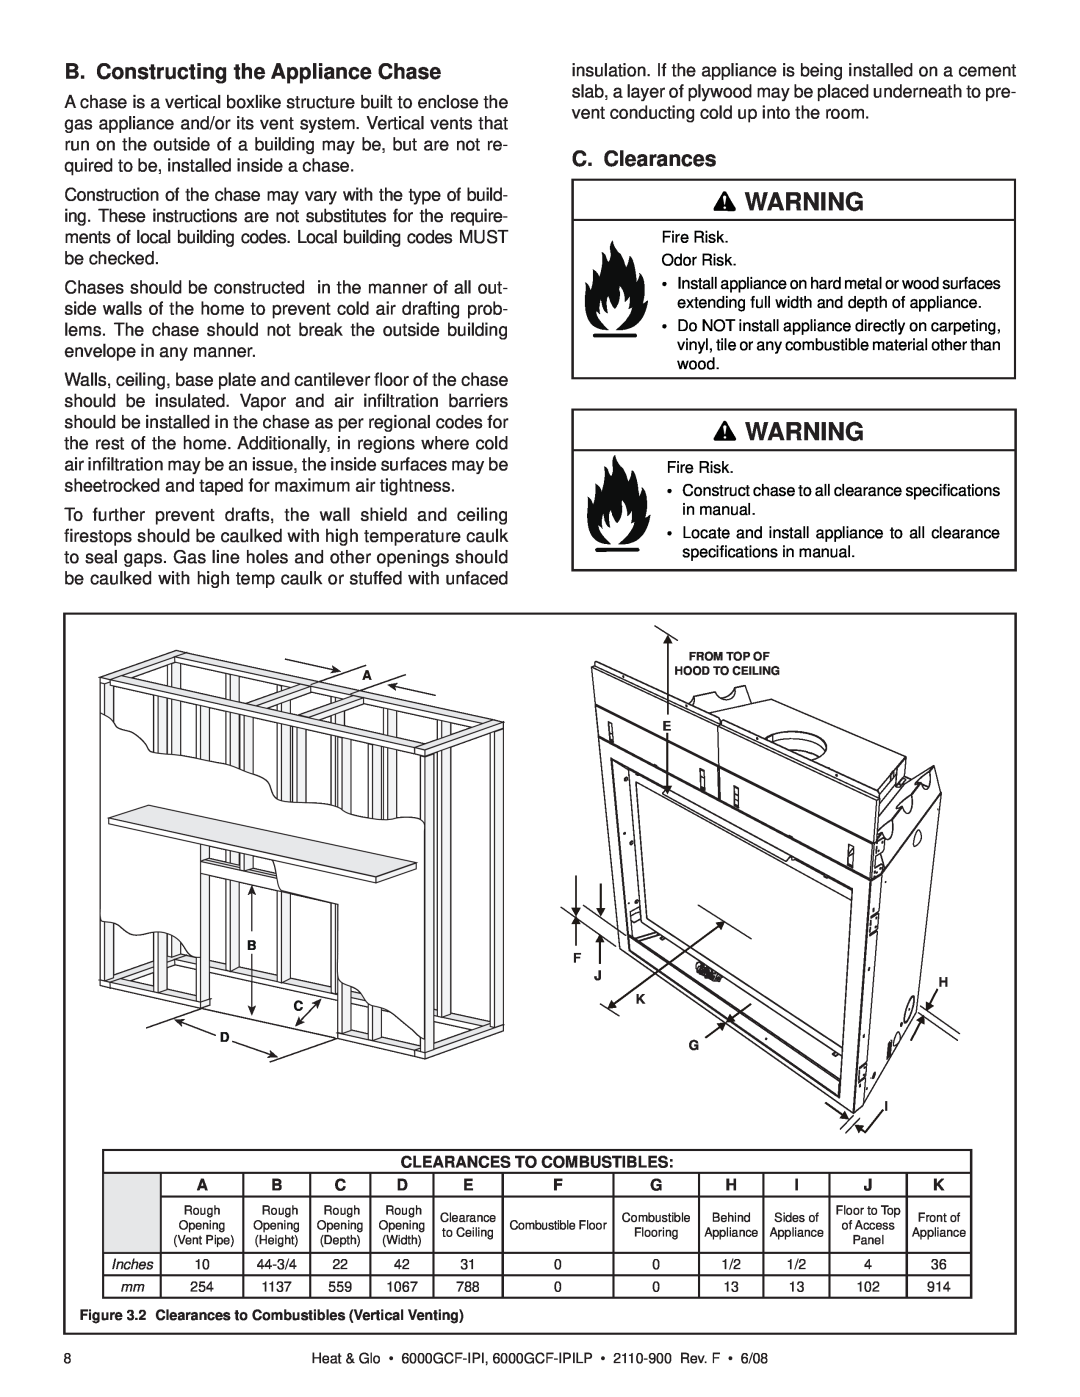 Heat & Glo LifeStyle 6000GCF-IPILP owner manual B. Constructing the Appliance Chase, C. Clearances 